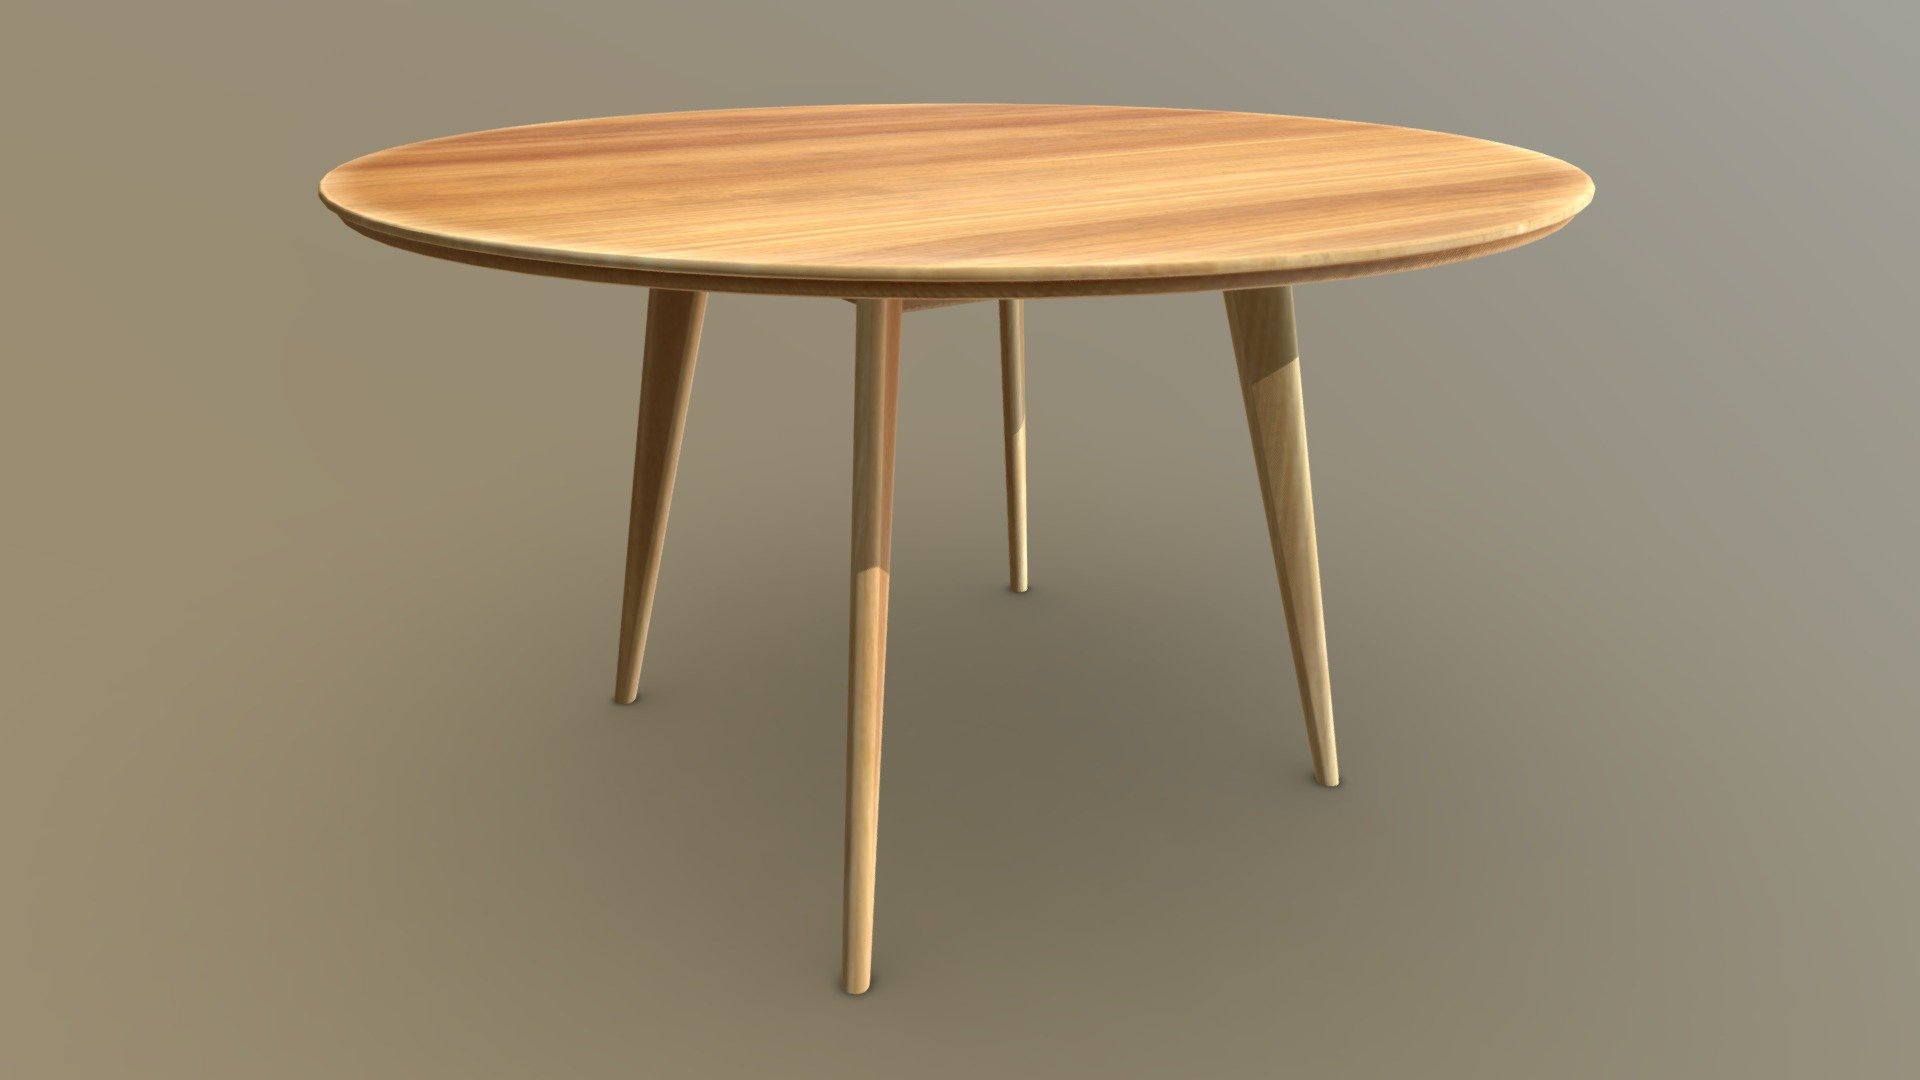 Generic, unbranded modern table design. Suitable for your next furniture / architecture / interior design project.

Also available as part of our 15 item asset pack: https://sketchfab.com/models/0fc4efd9f5f44faa98eece686d8cb890 - Round table - Buy Royalty Free 3D model by Virtual Studio (@virtualstudio) 3d model